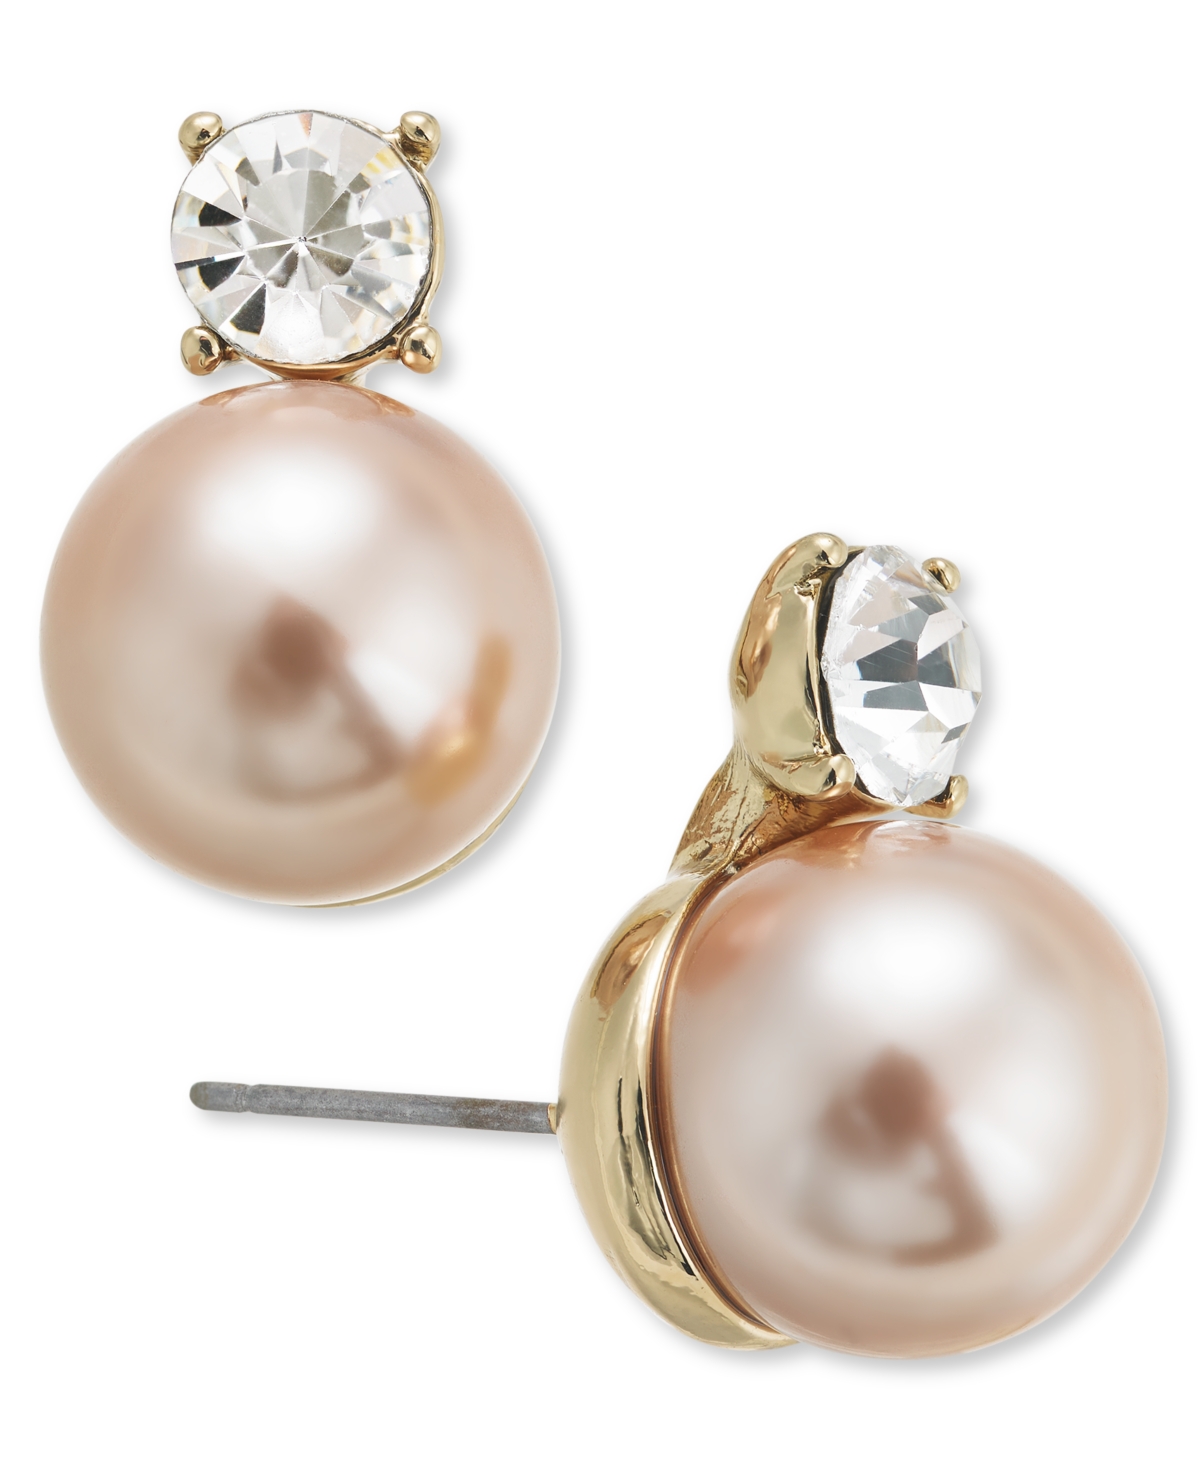 Gold-Tone Imitation Pearl & Crystal Stud Earrings, Created for Macy's - Pink